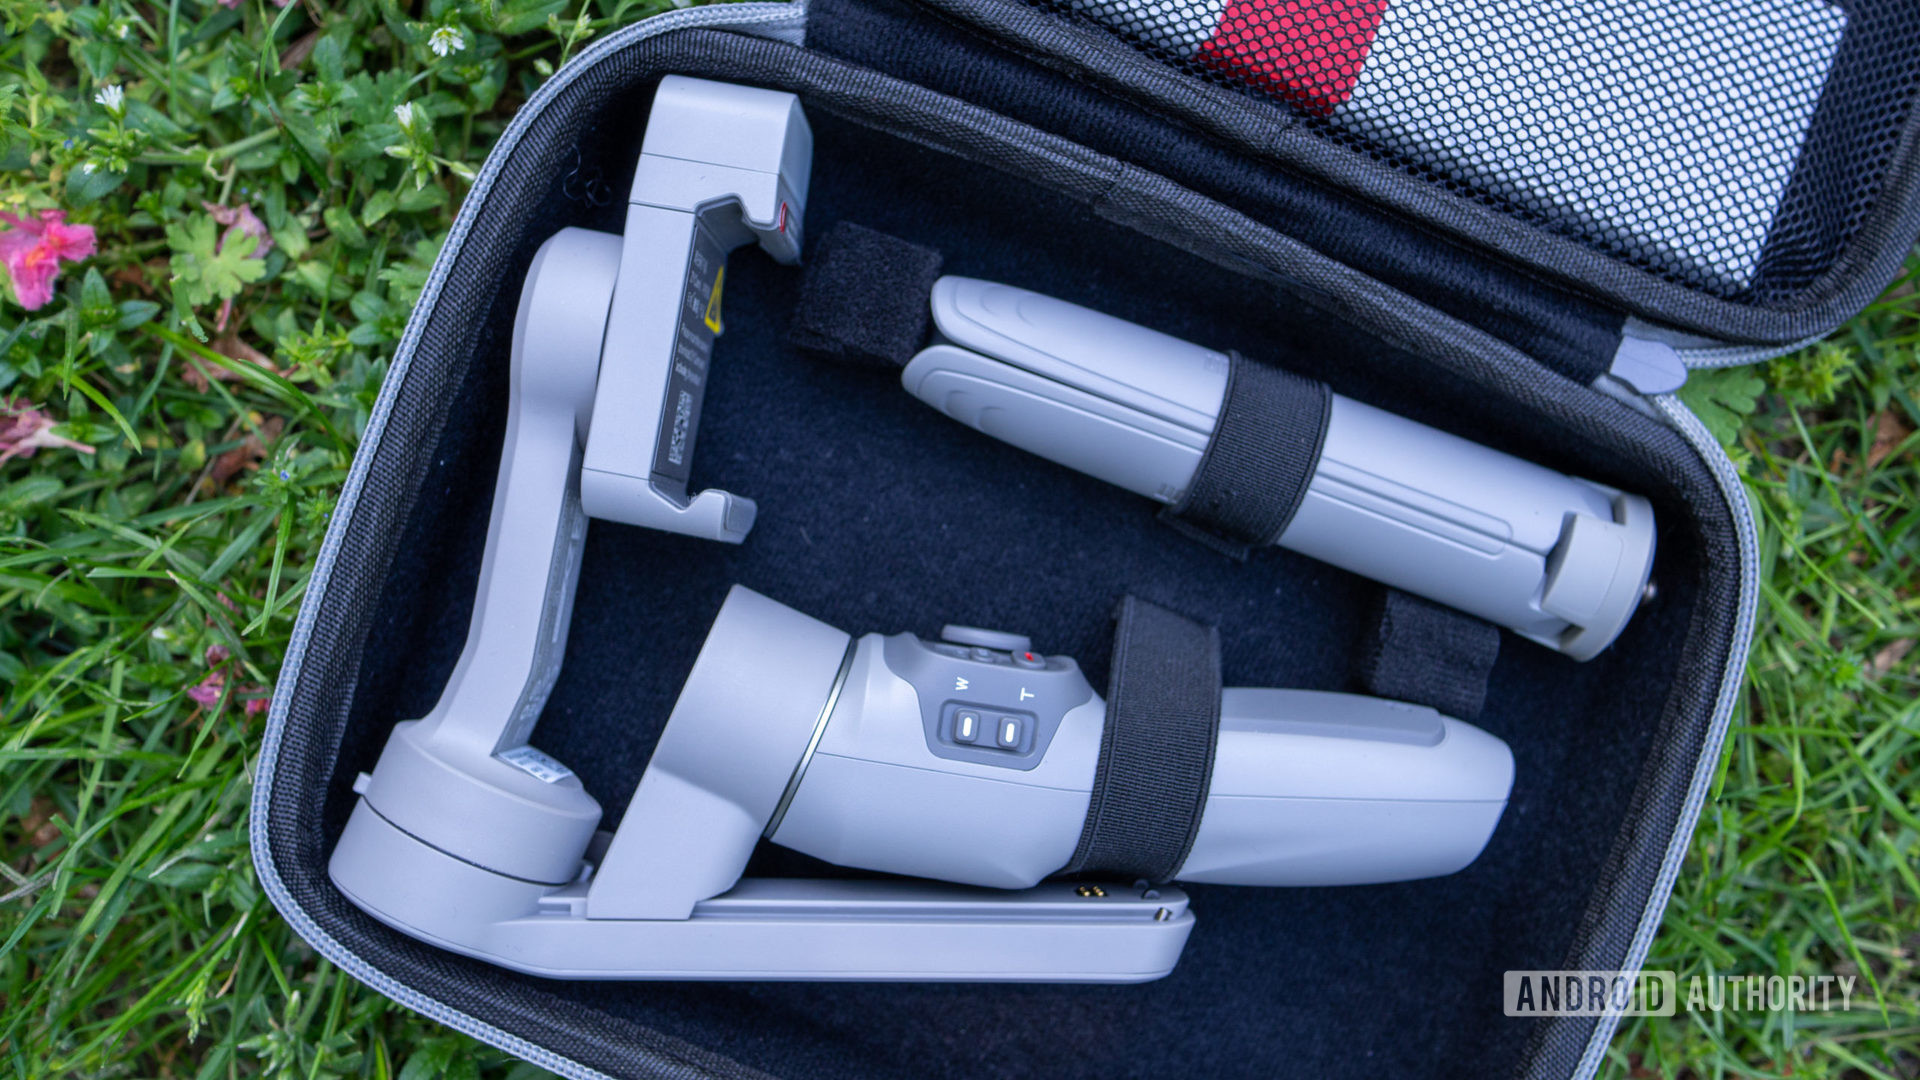 Zhiyun Smooth Q3 in carrying case with tripod